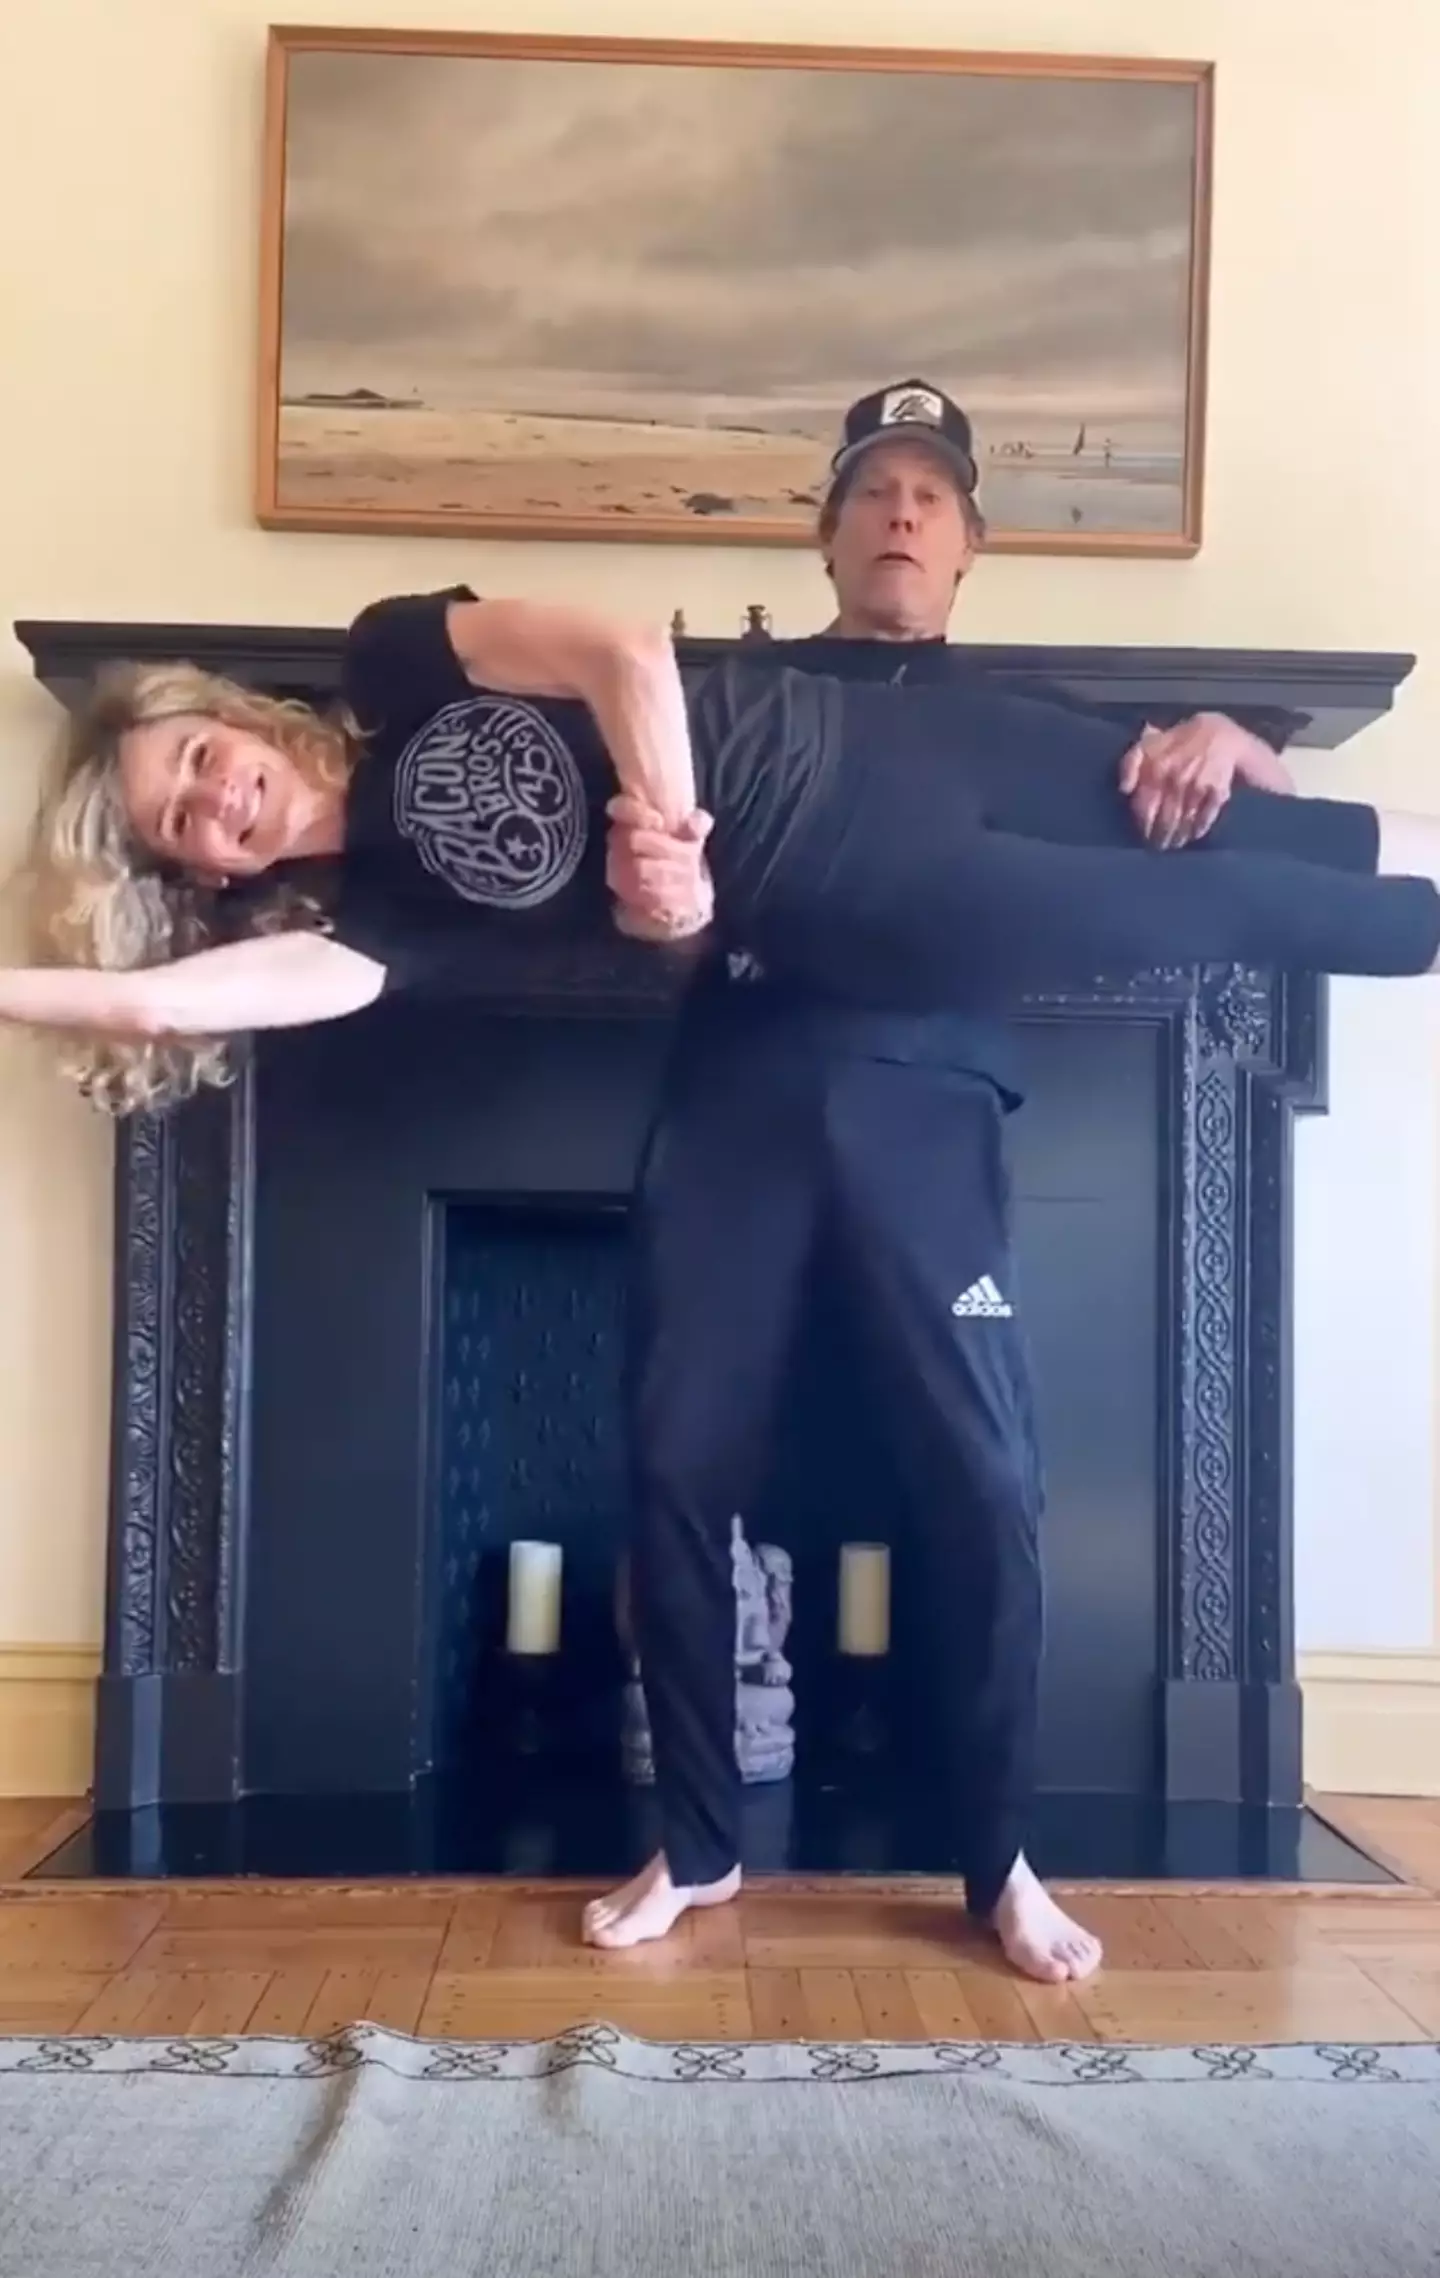 Kevin Bacon and his wife, Kyra Sedgwick, nailed the viral trend.